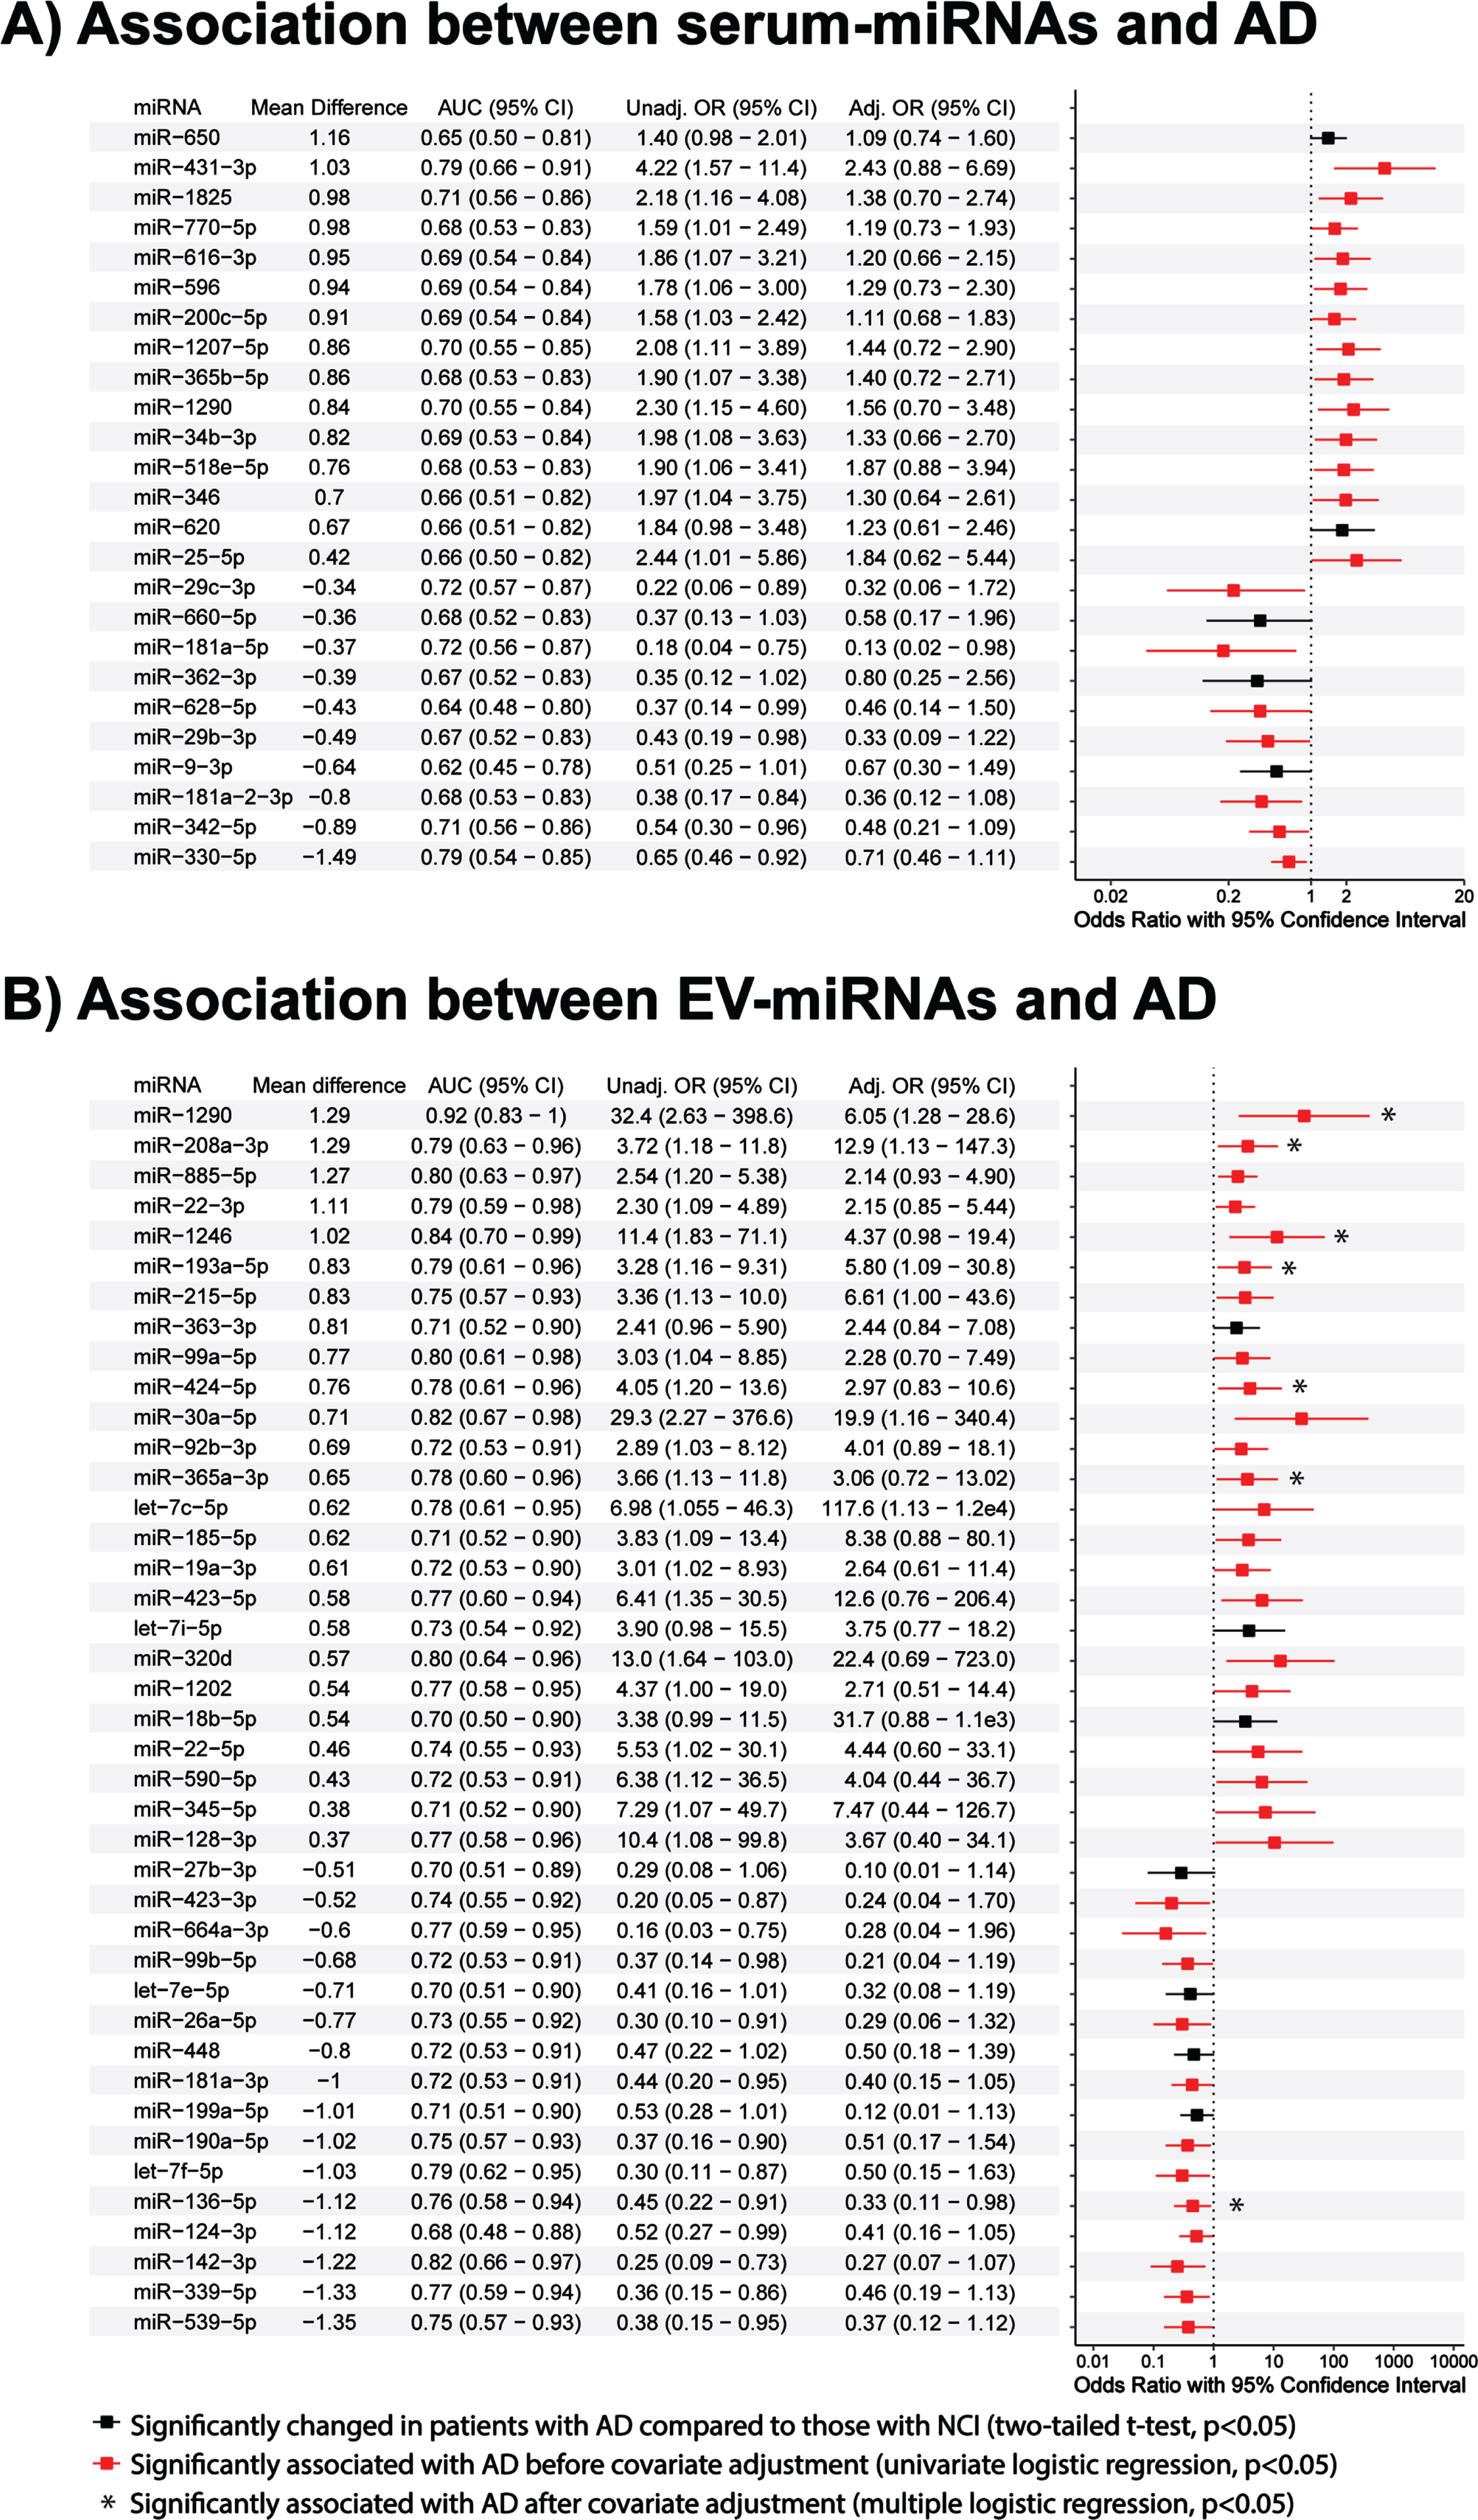 Associations of serum-miRNAs and EV-miRNAs with AD. Forest plots showing univariate logistic regression analyses of (A) 25 serum-miRNAs and (B) 41 EV-miRNAs that were significantly altered in AD. Shown are odds ratio (OR) associations between miRNAs and AD and their 95% confidence intervals (CIs). Red lines indicate significant association before covariate adjustment (p < 0.05, univariate binary logistic regression), while asterisks indicate significant association after covariate adjustment for age, education and APOE ɛ4, hypertension, and diabetes (p < 0.05, multiple binary logistic regression).